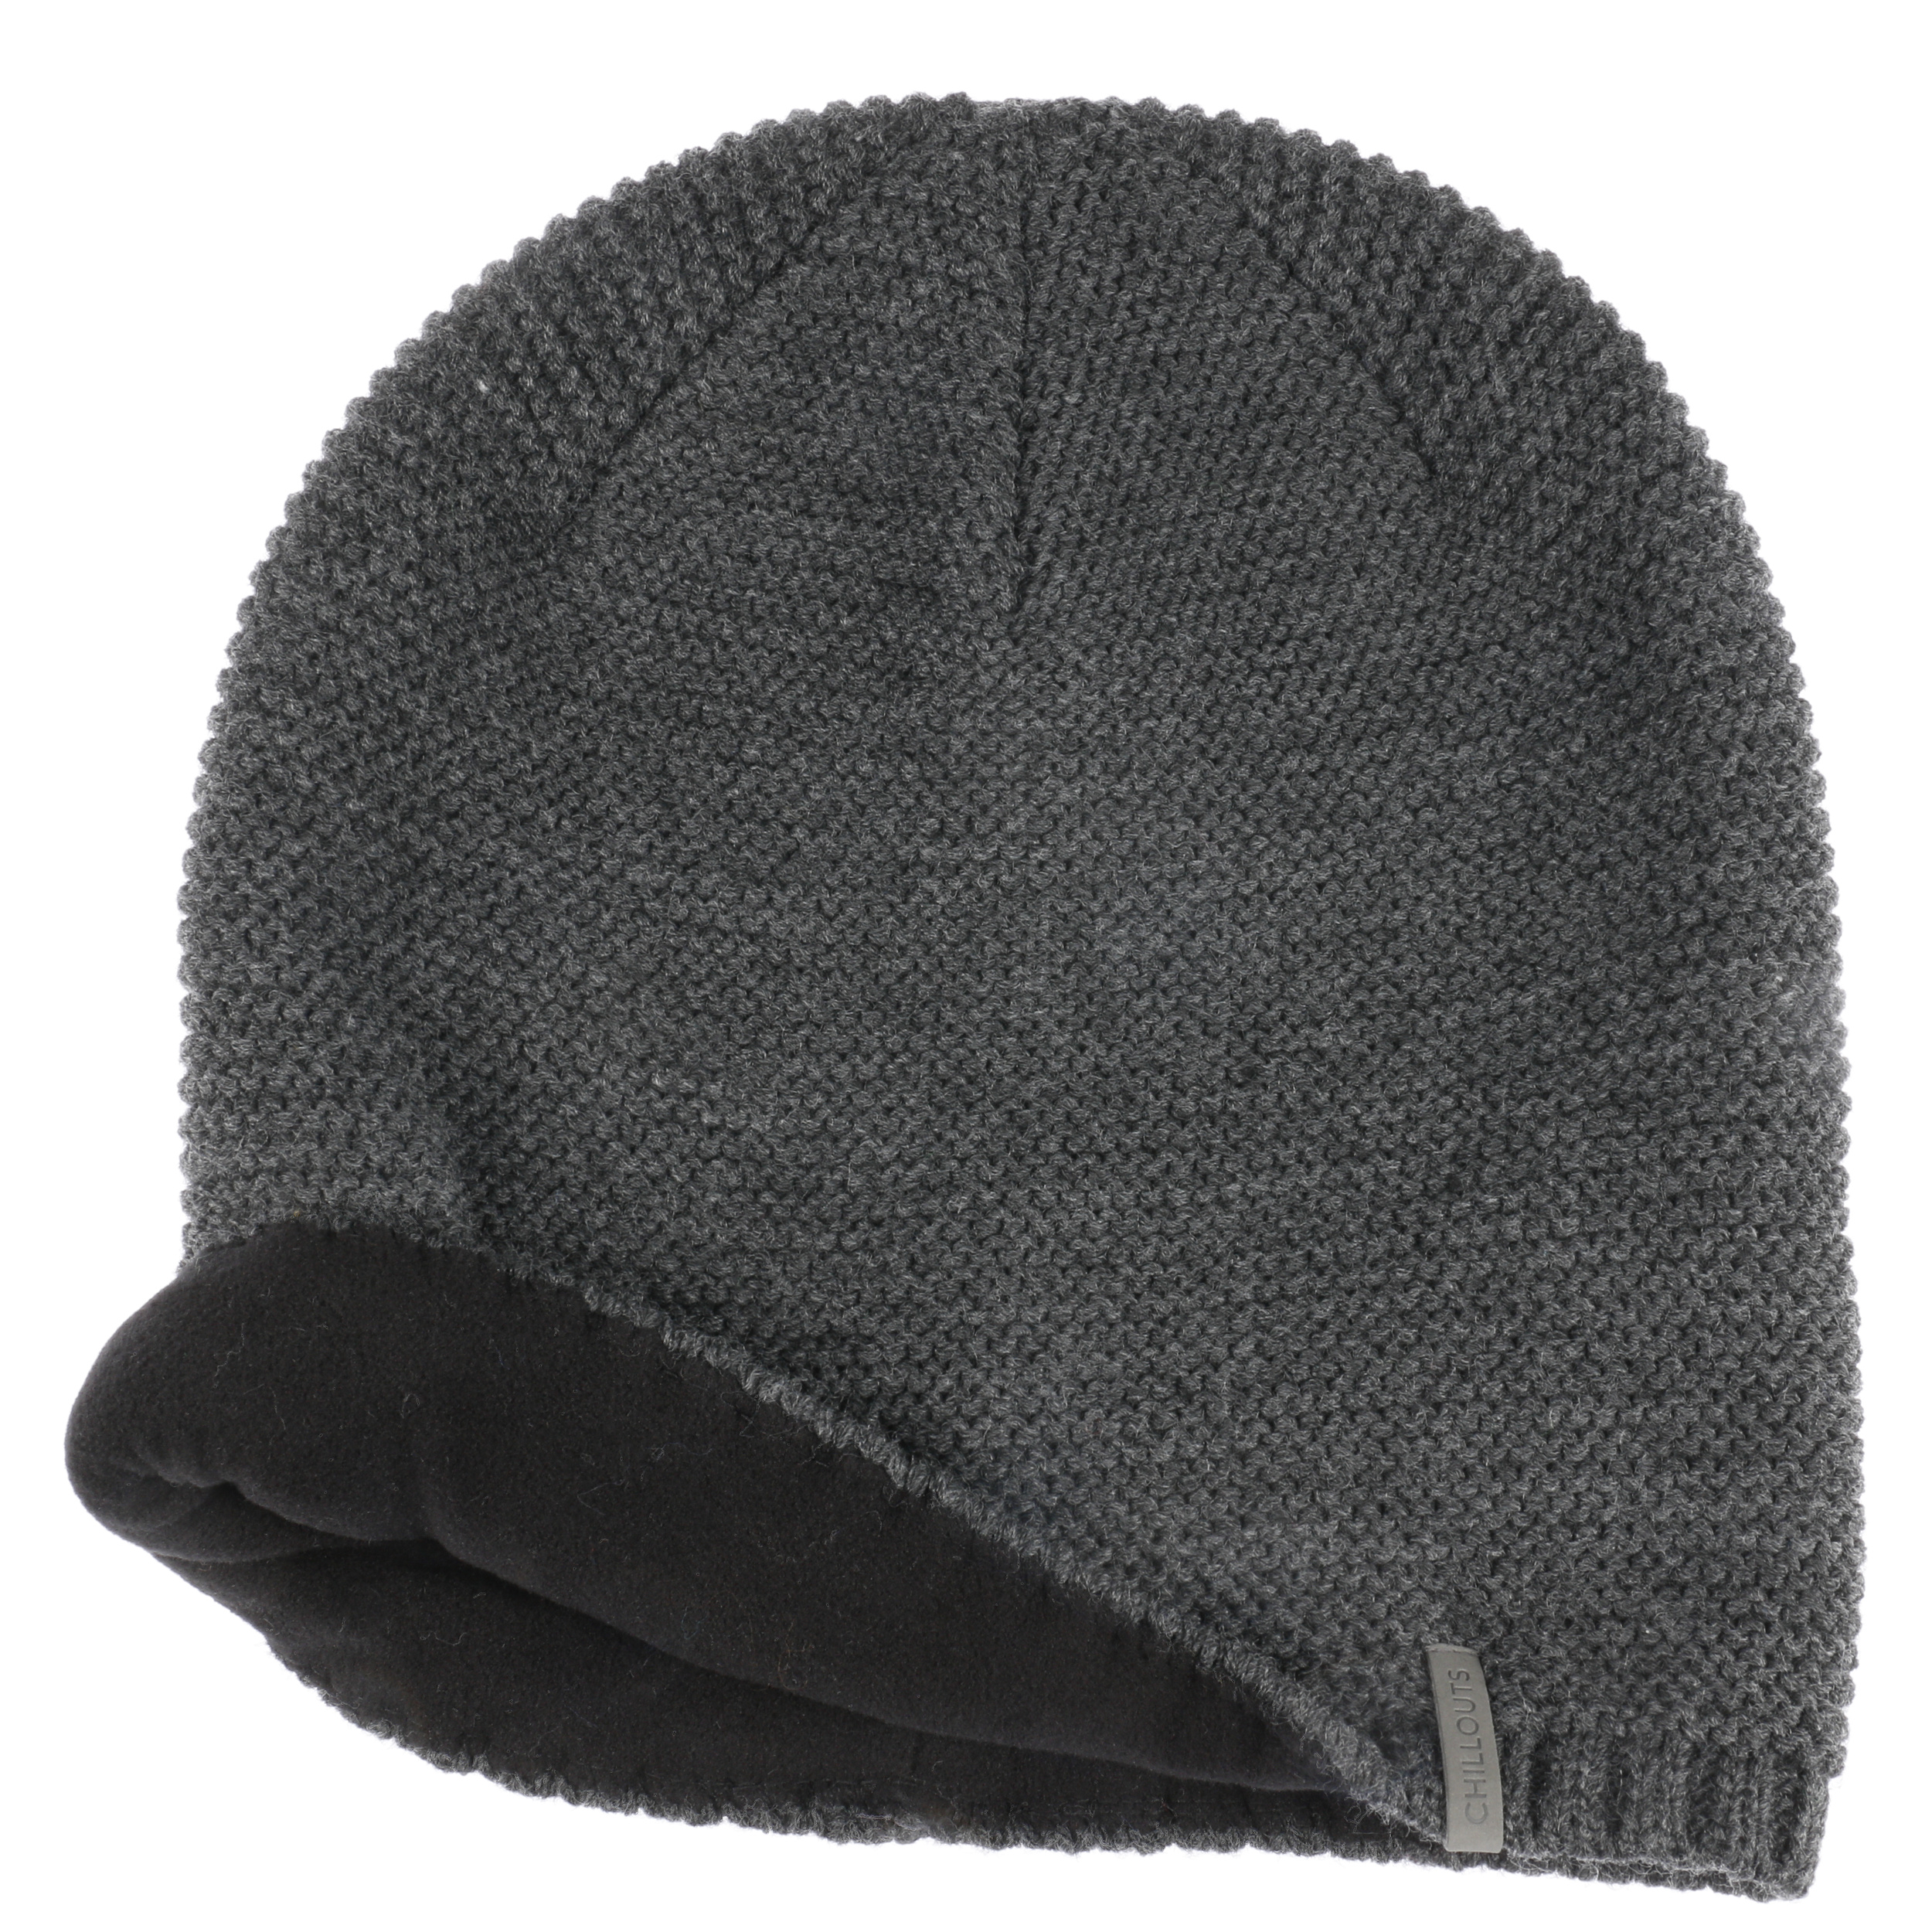 Keith Beanie € - 37,95 Hat by Chillouts